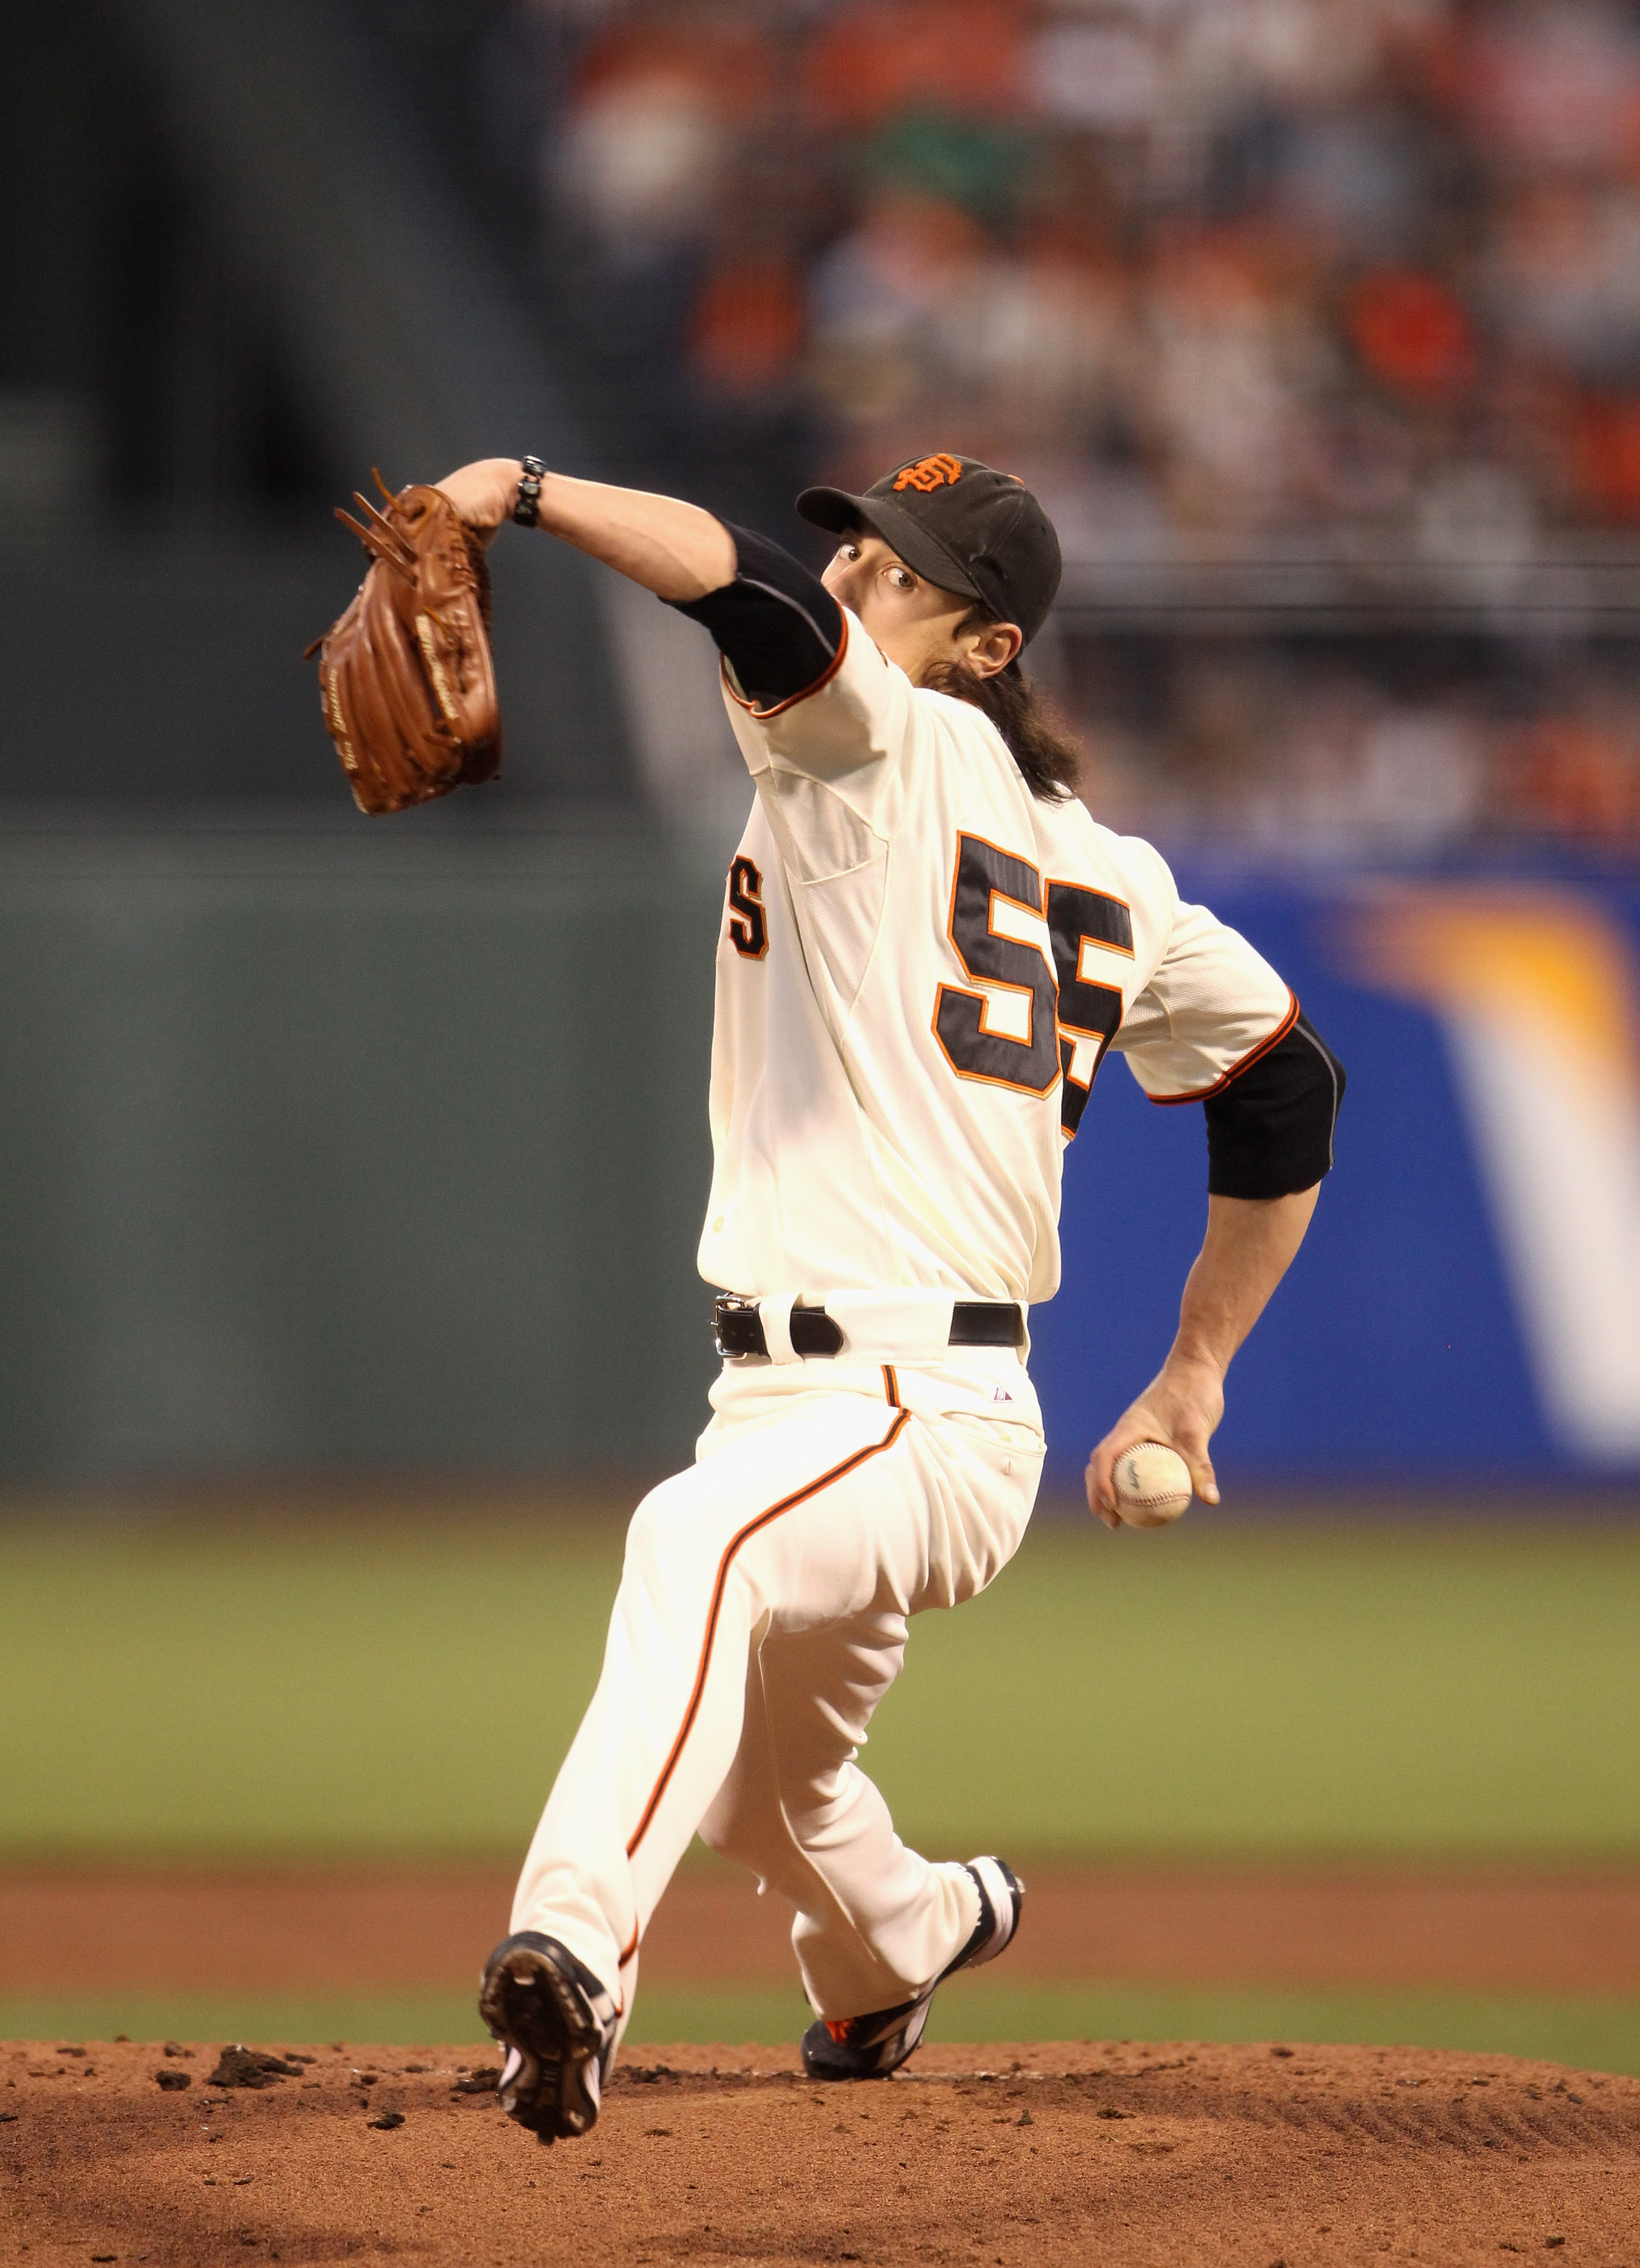 SAN FRANCISCO - OCTOBER 07:  Tim Lincecum #55 of the San Francisco Giants pitches against the Atlanta Braves in game 1 of the NLDS at AT&T Park on October 7, 2010 in San Francisco, California.  (Photo by Ezra Shaw/Getty Images)